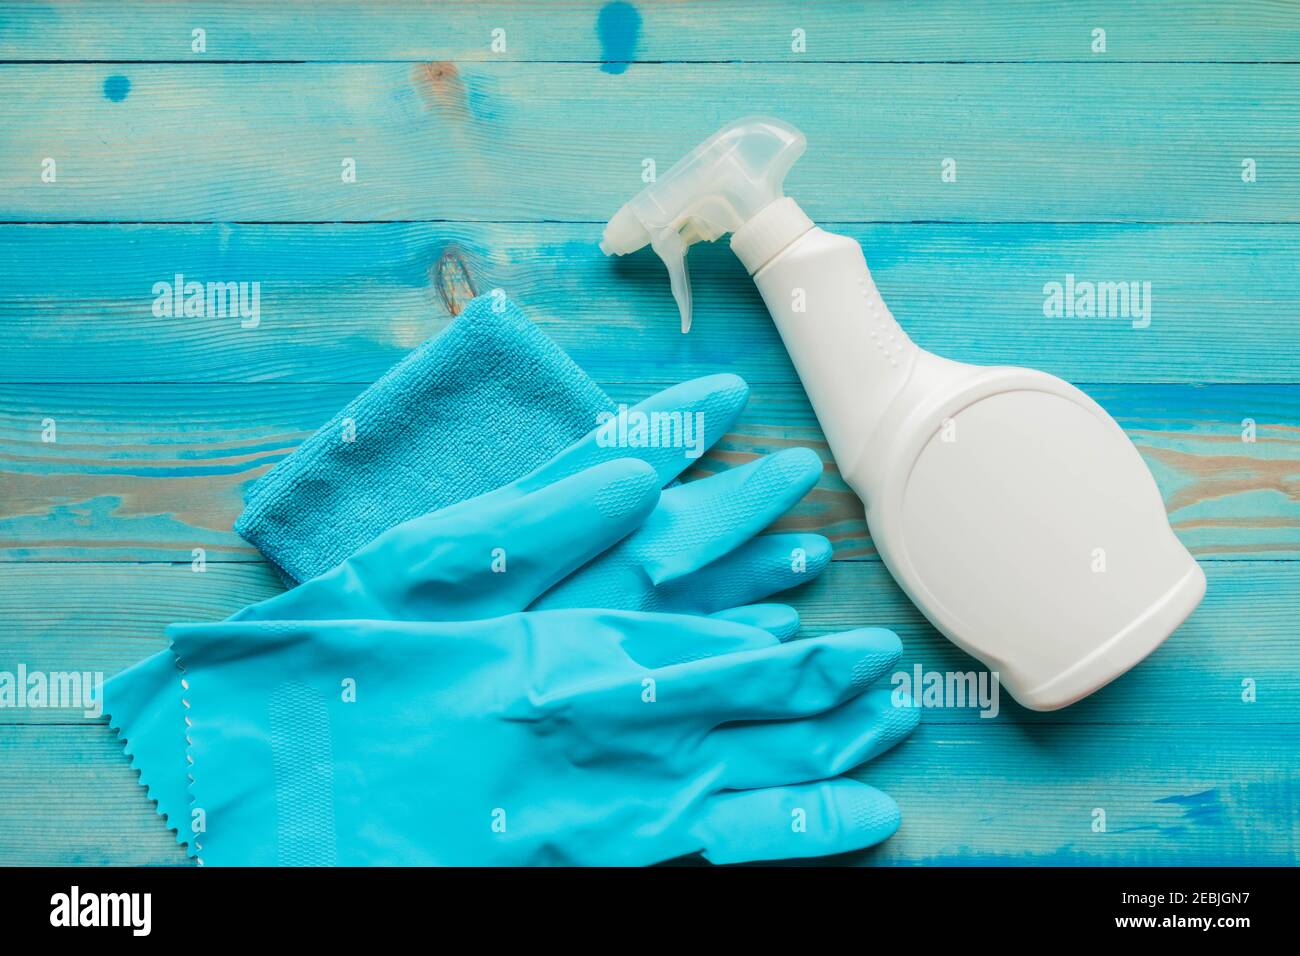 Cleaning supplies for disinfection. White spray bottle with disinfectant liquid, blue rubber gloves and microfiber cloth on blue wooden background. Hy Stock Photo